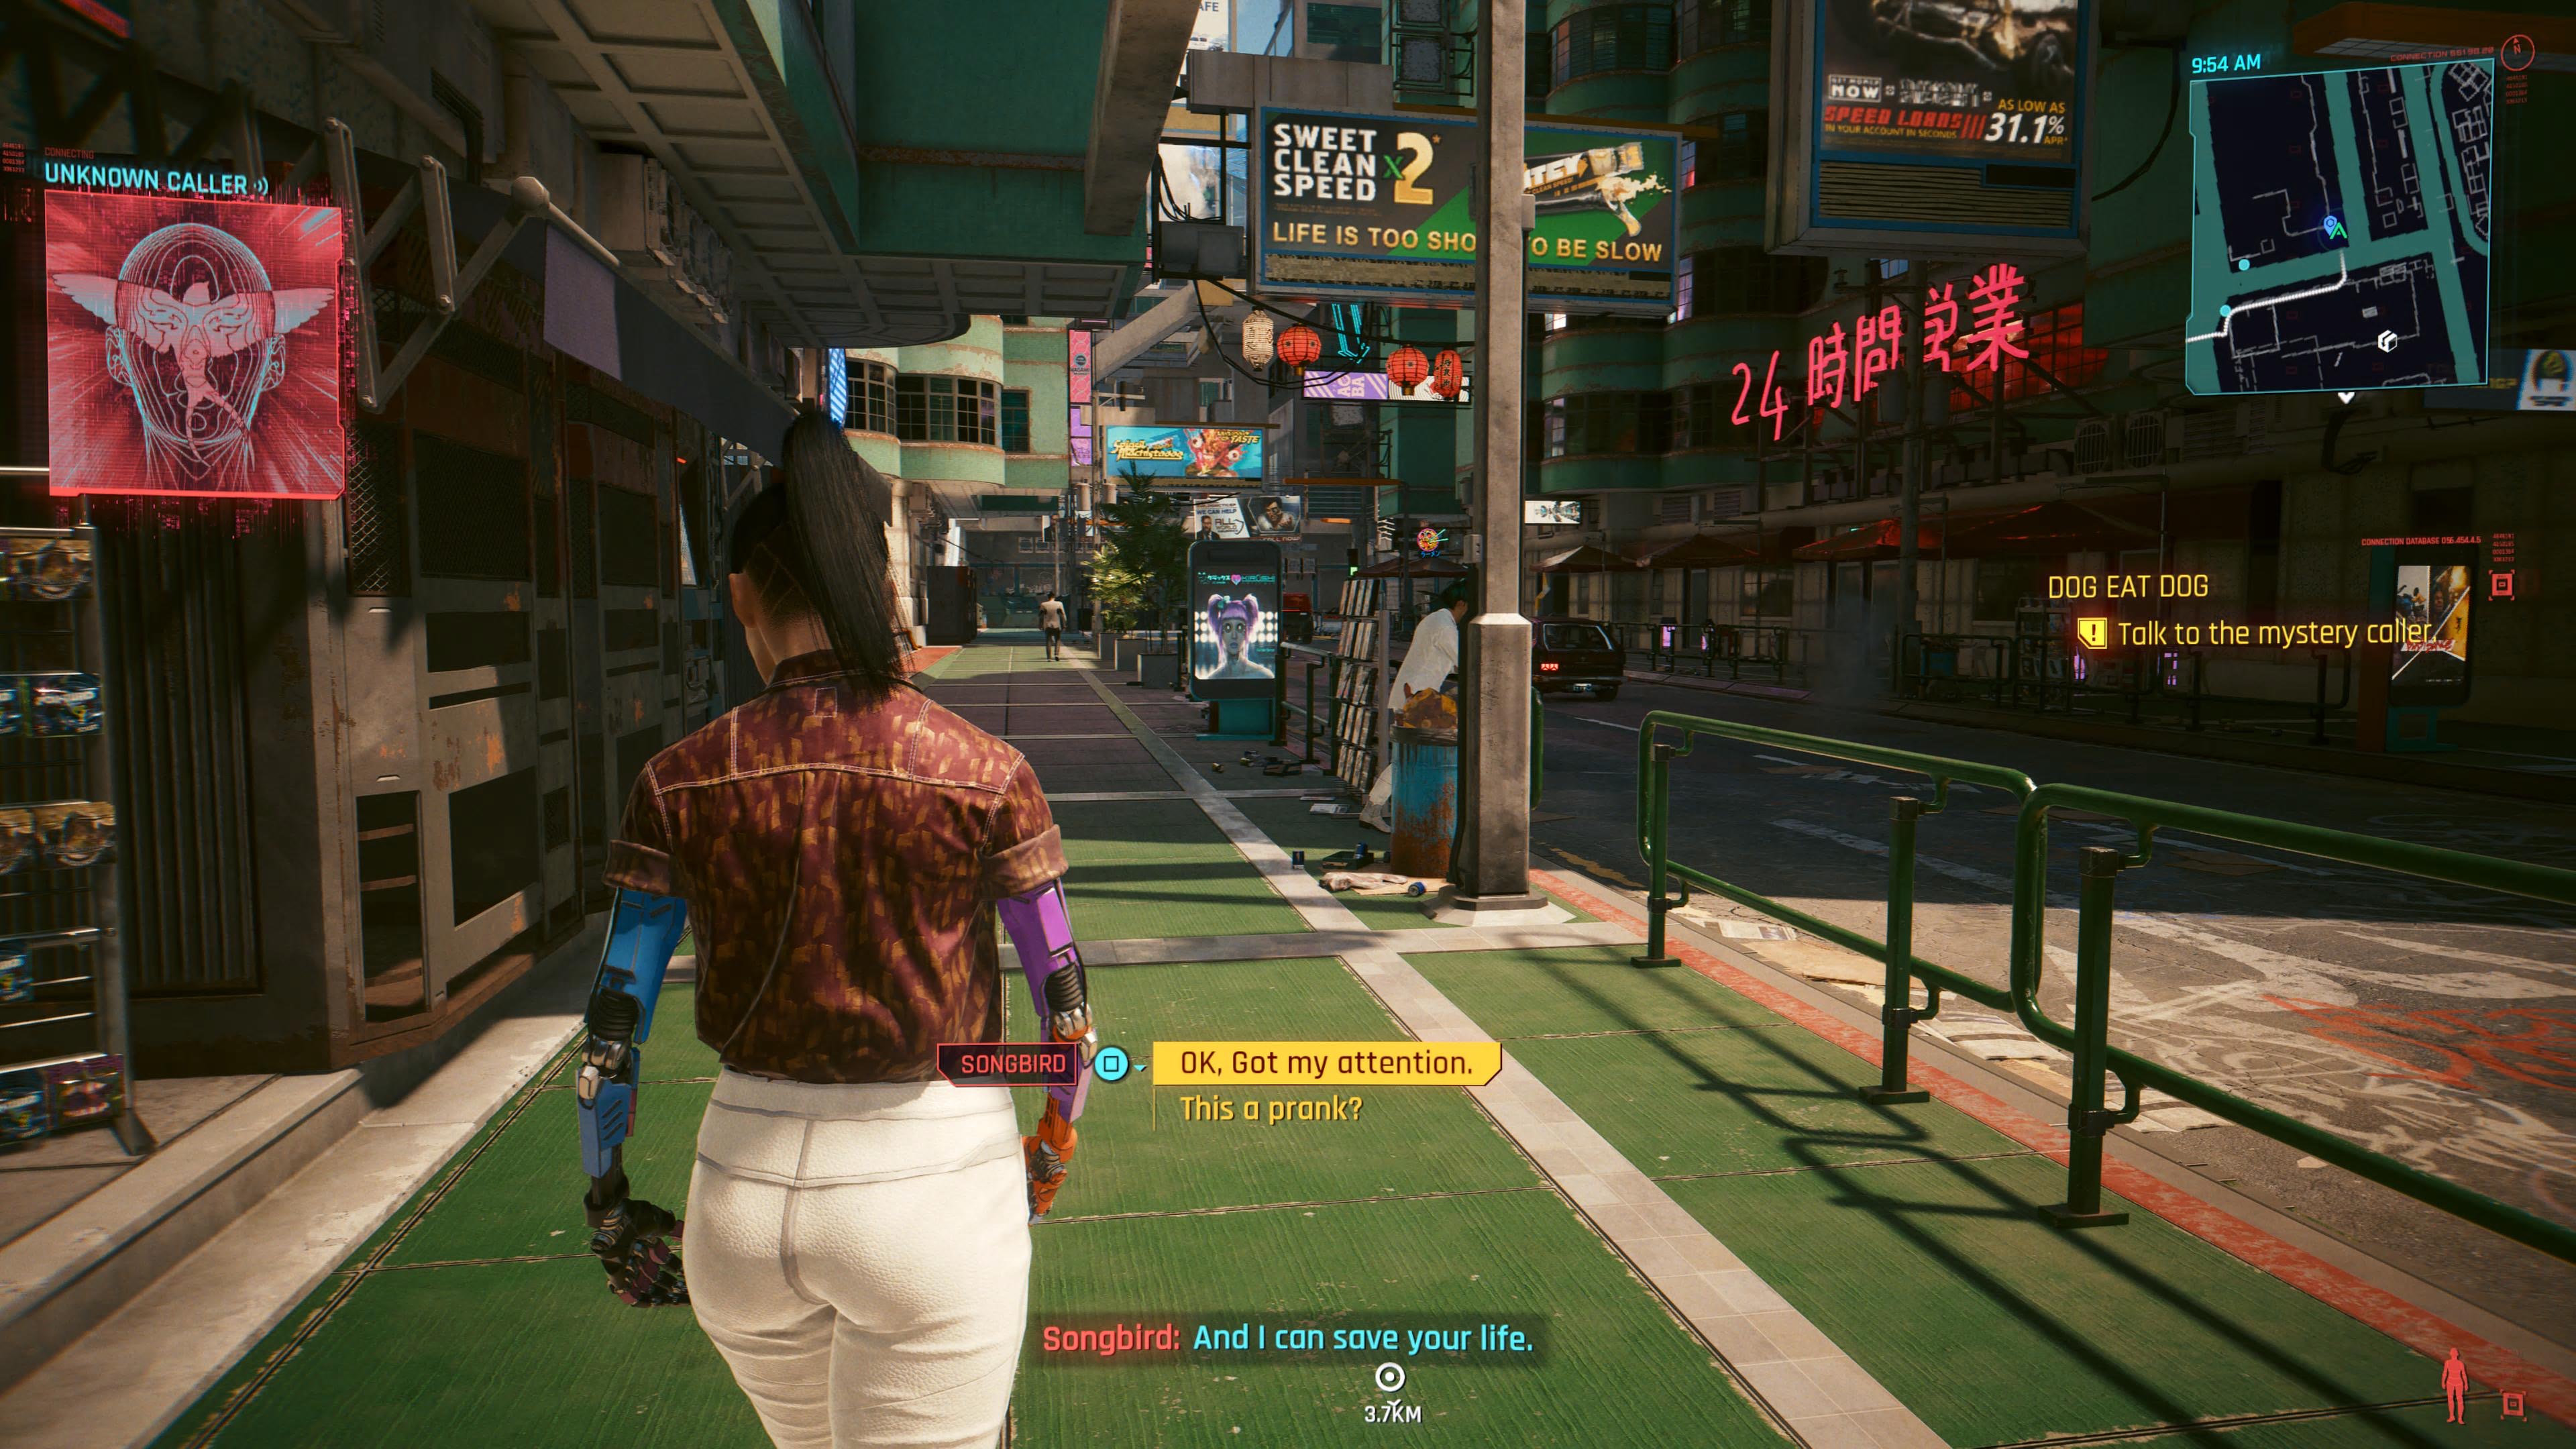 An in game screenshot of a mysterious call from the game Cyberpunk 2077.